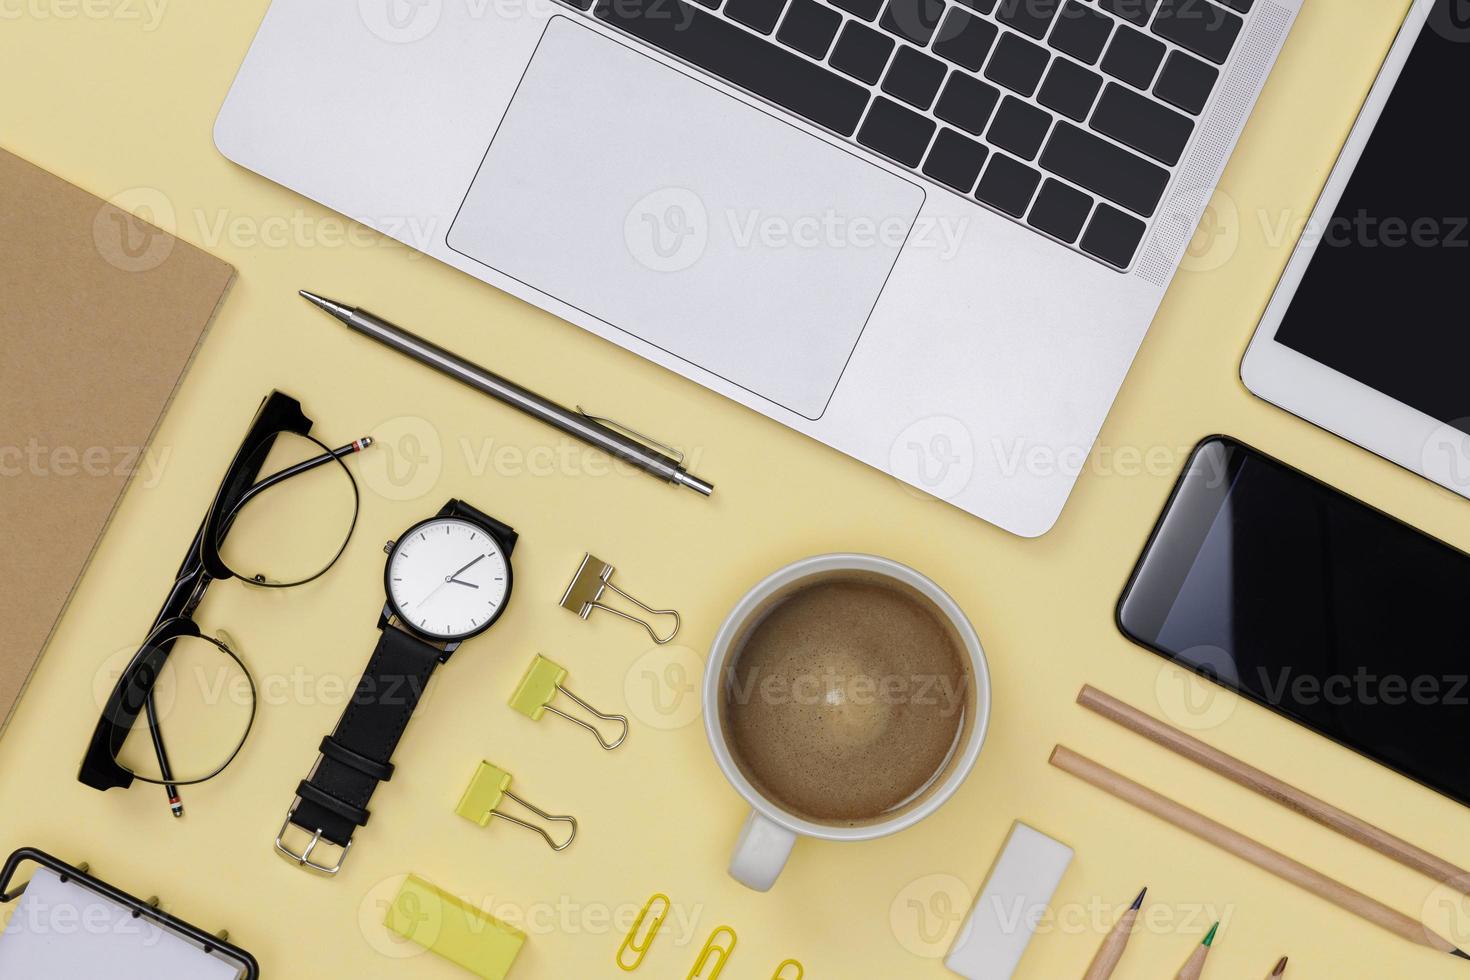 Creative flat lay of office supplies mockup with notebook, hot coffee cup, tablet, smartphone, glasses, books and accessories isolated on yellow background, Workspace for freelancer concept photo